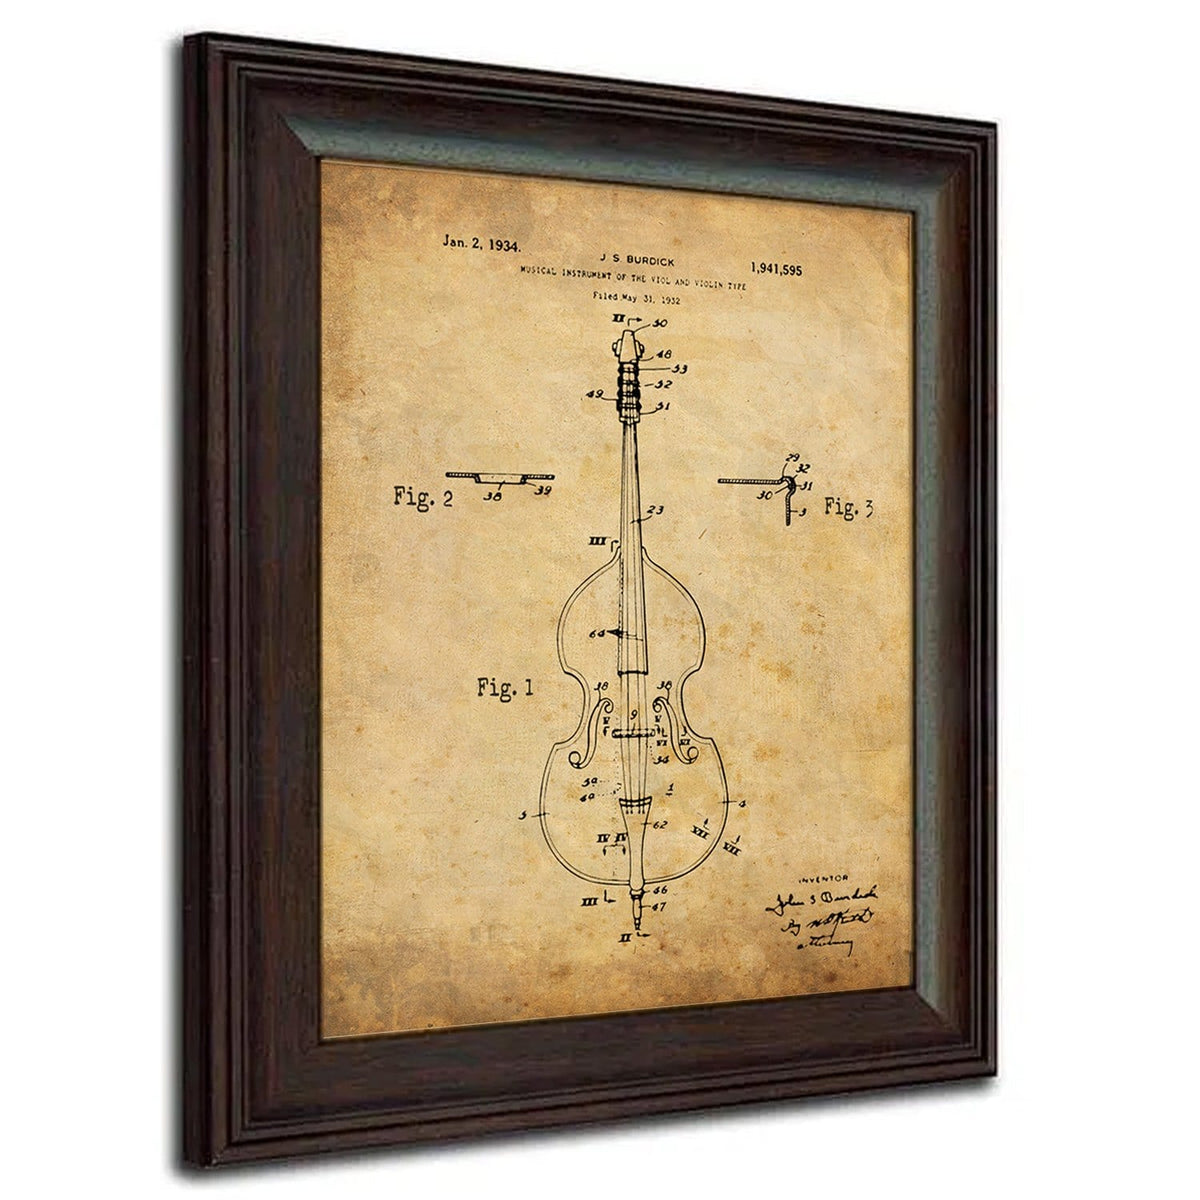 US Patent drawing for 1934 stand up bass string instrument